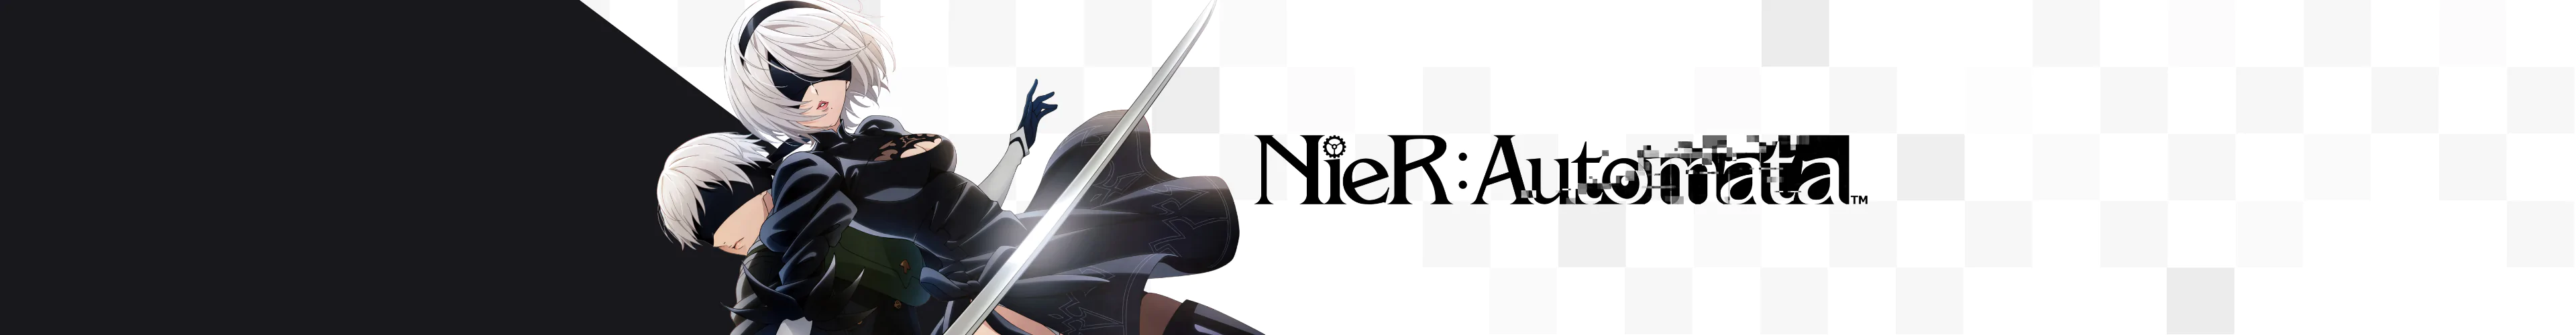 NieR products banner